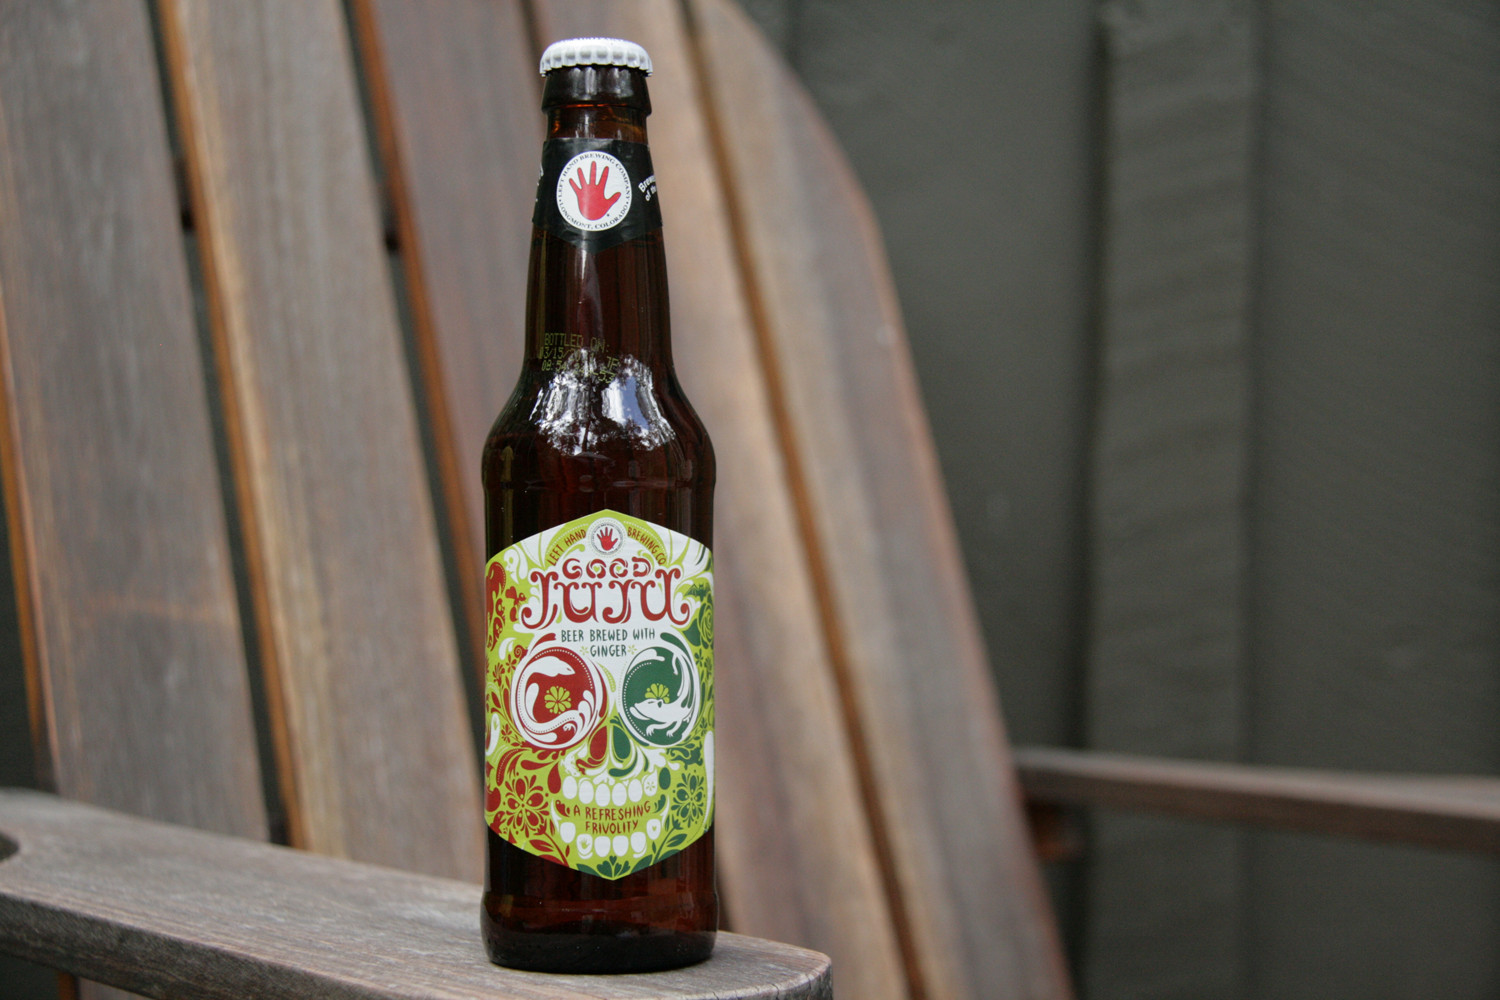 Good Juju summer beer is made with ginger.